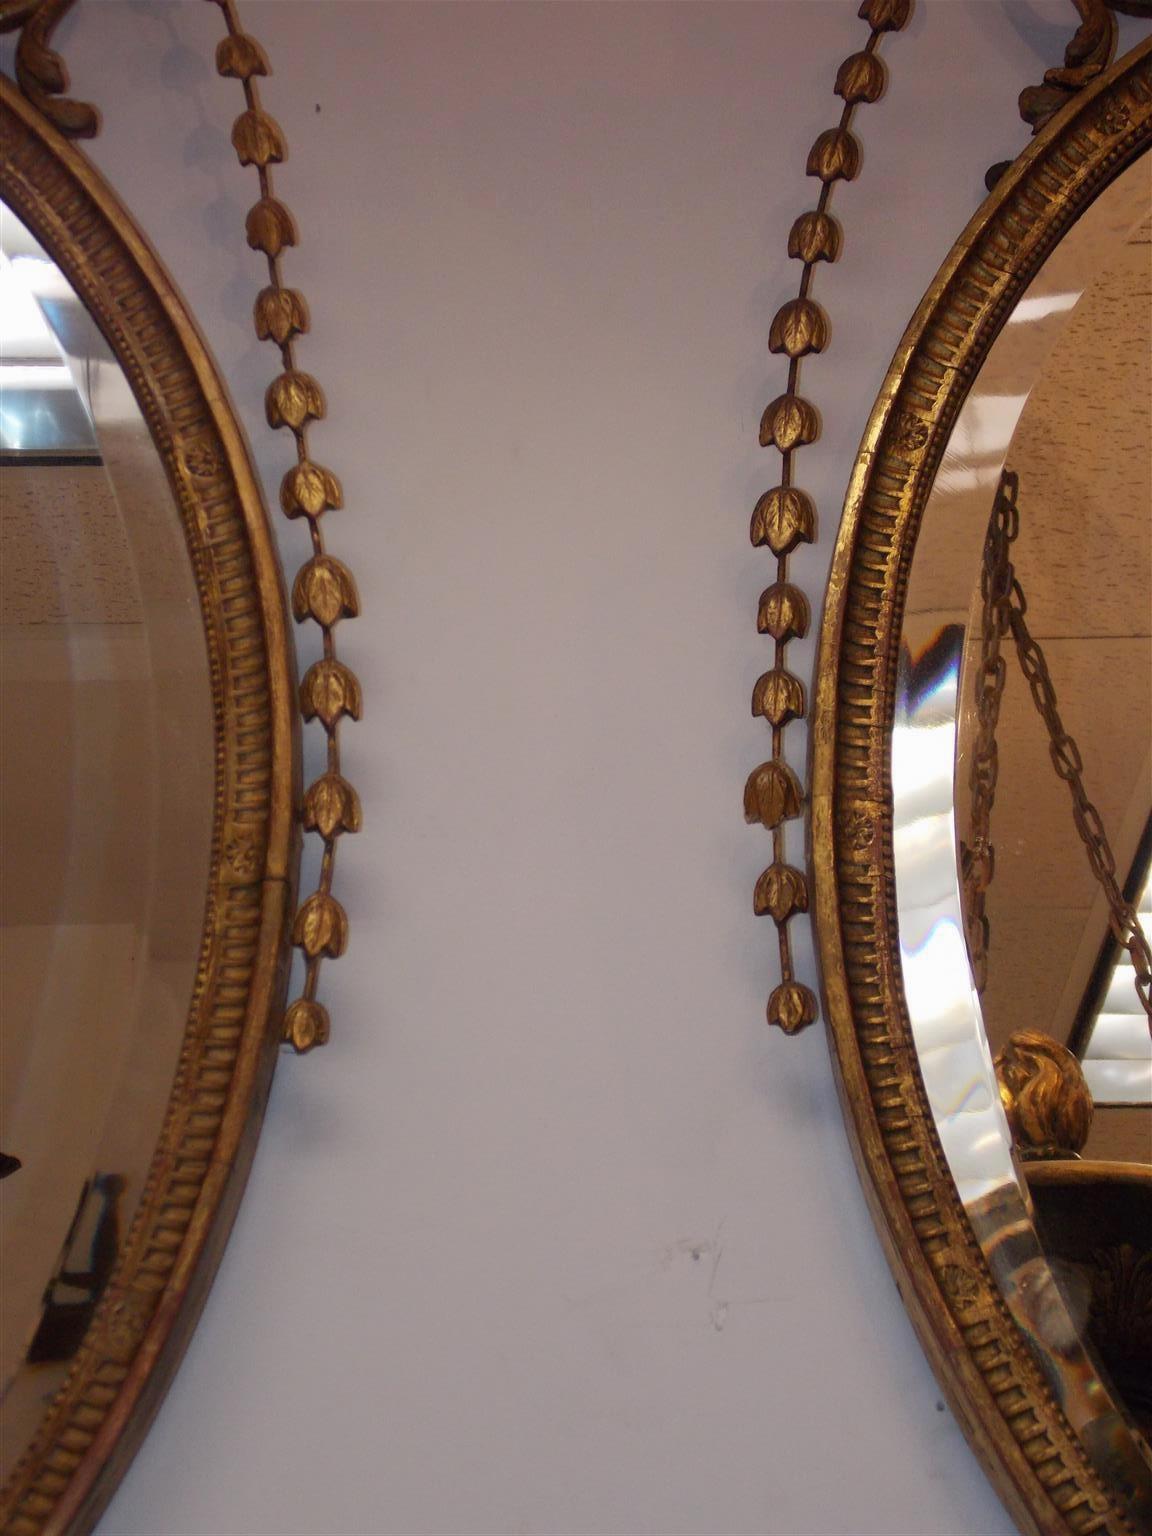 Pair of English Adam Oval Urn & Bell Flower Mirrors with Beveled Glass, C. 1800 For Sale 3